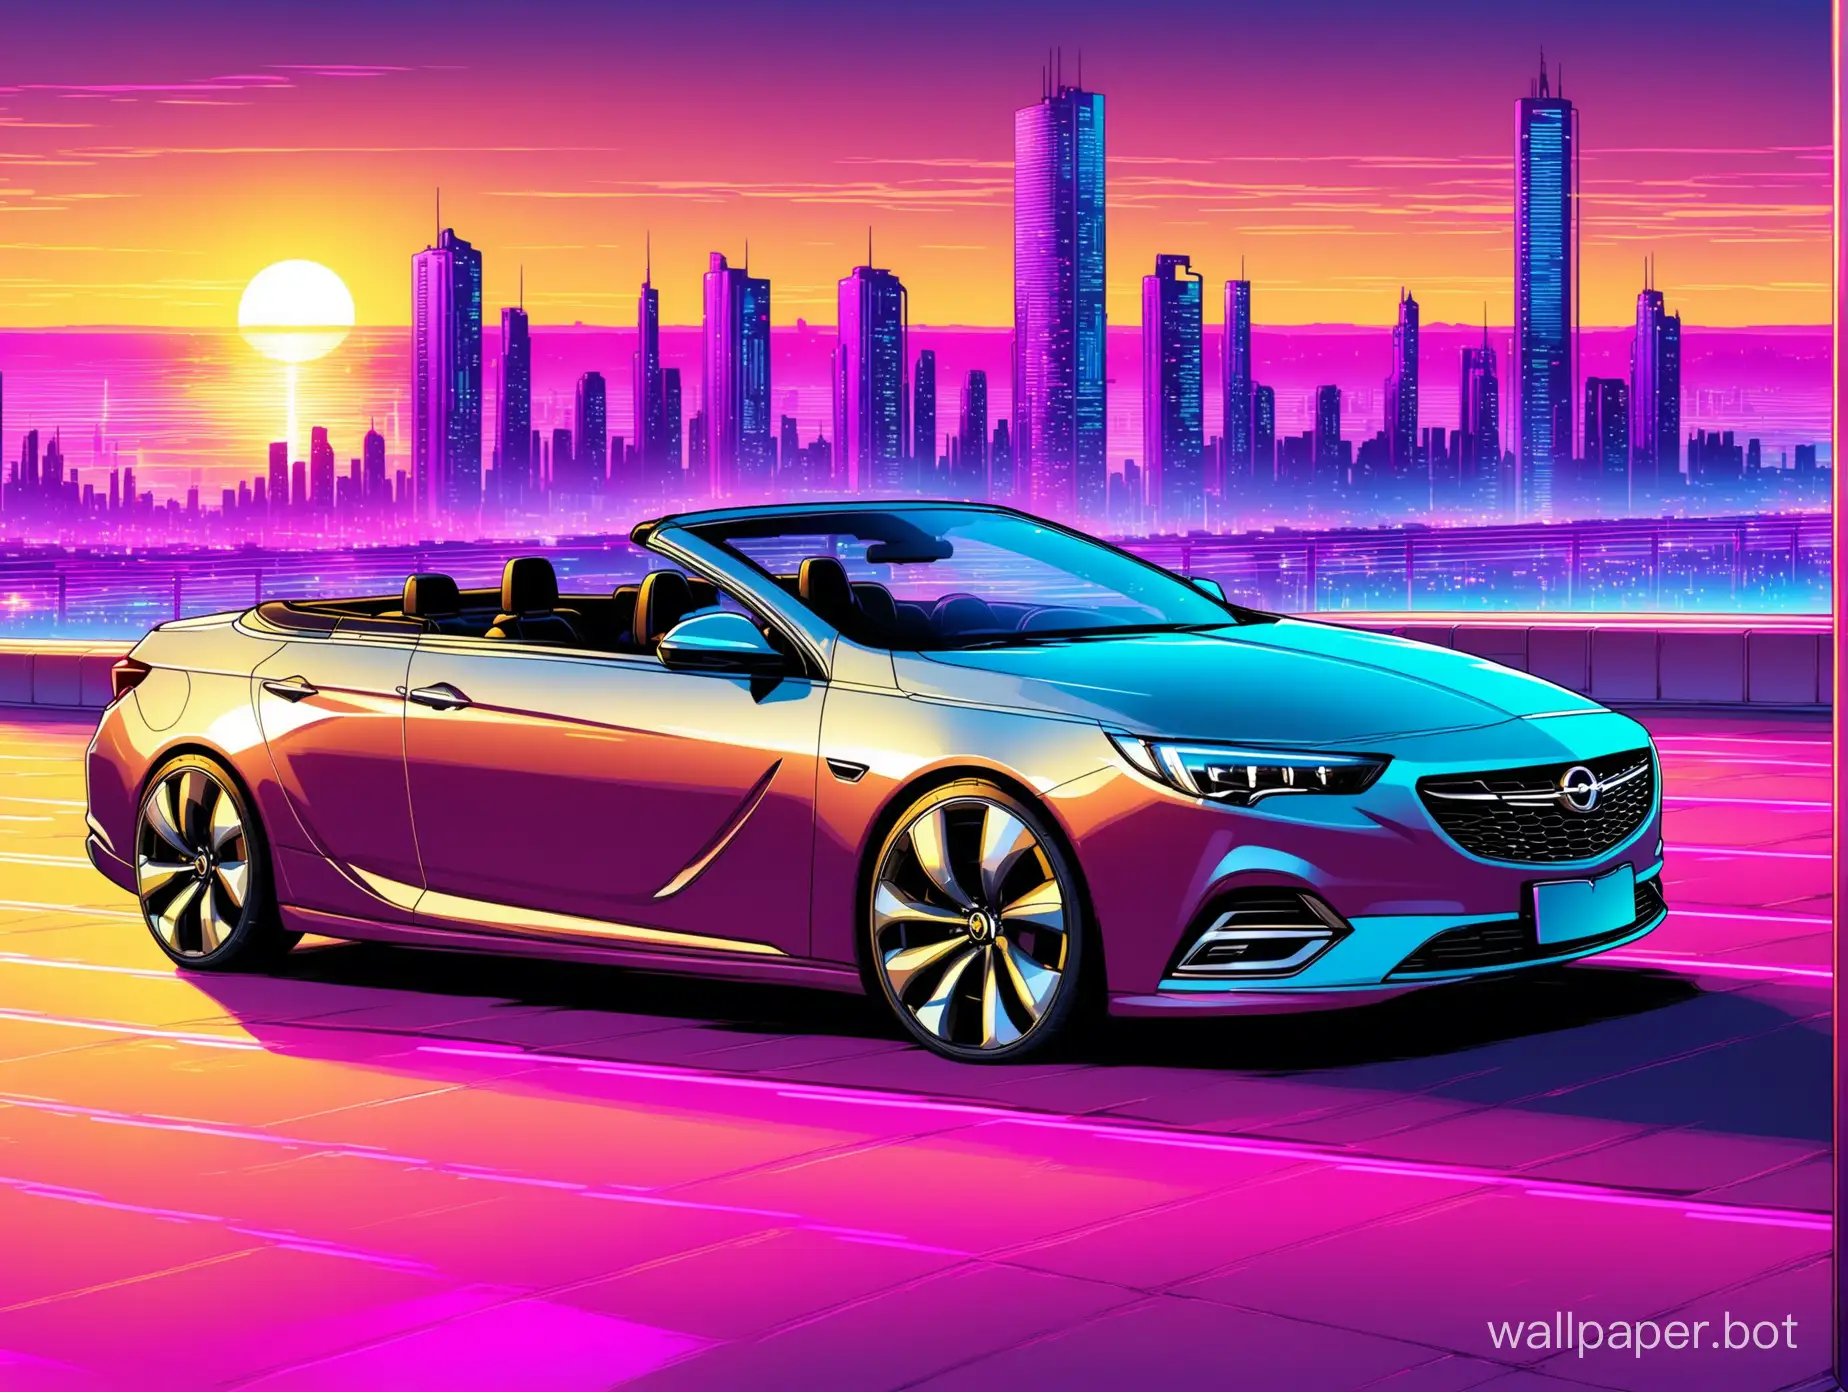 opel insignia grand sport convertible with one door in steel color with a futuristic city at sundown in the background, synthwave style